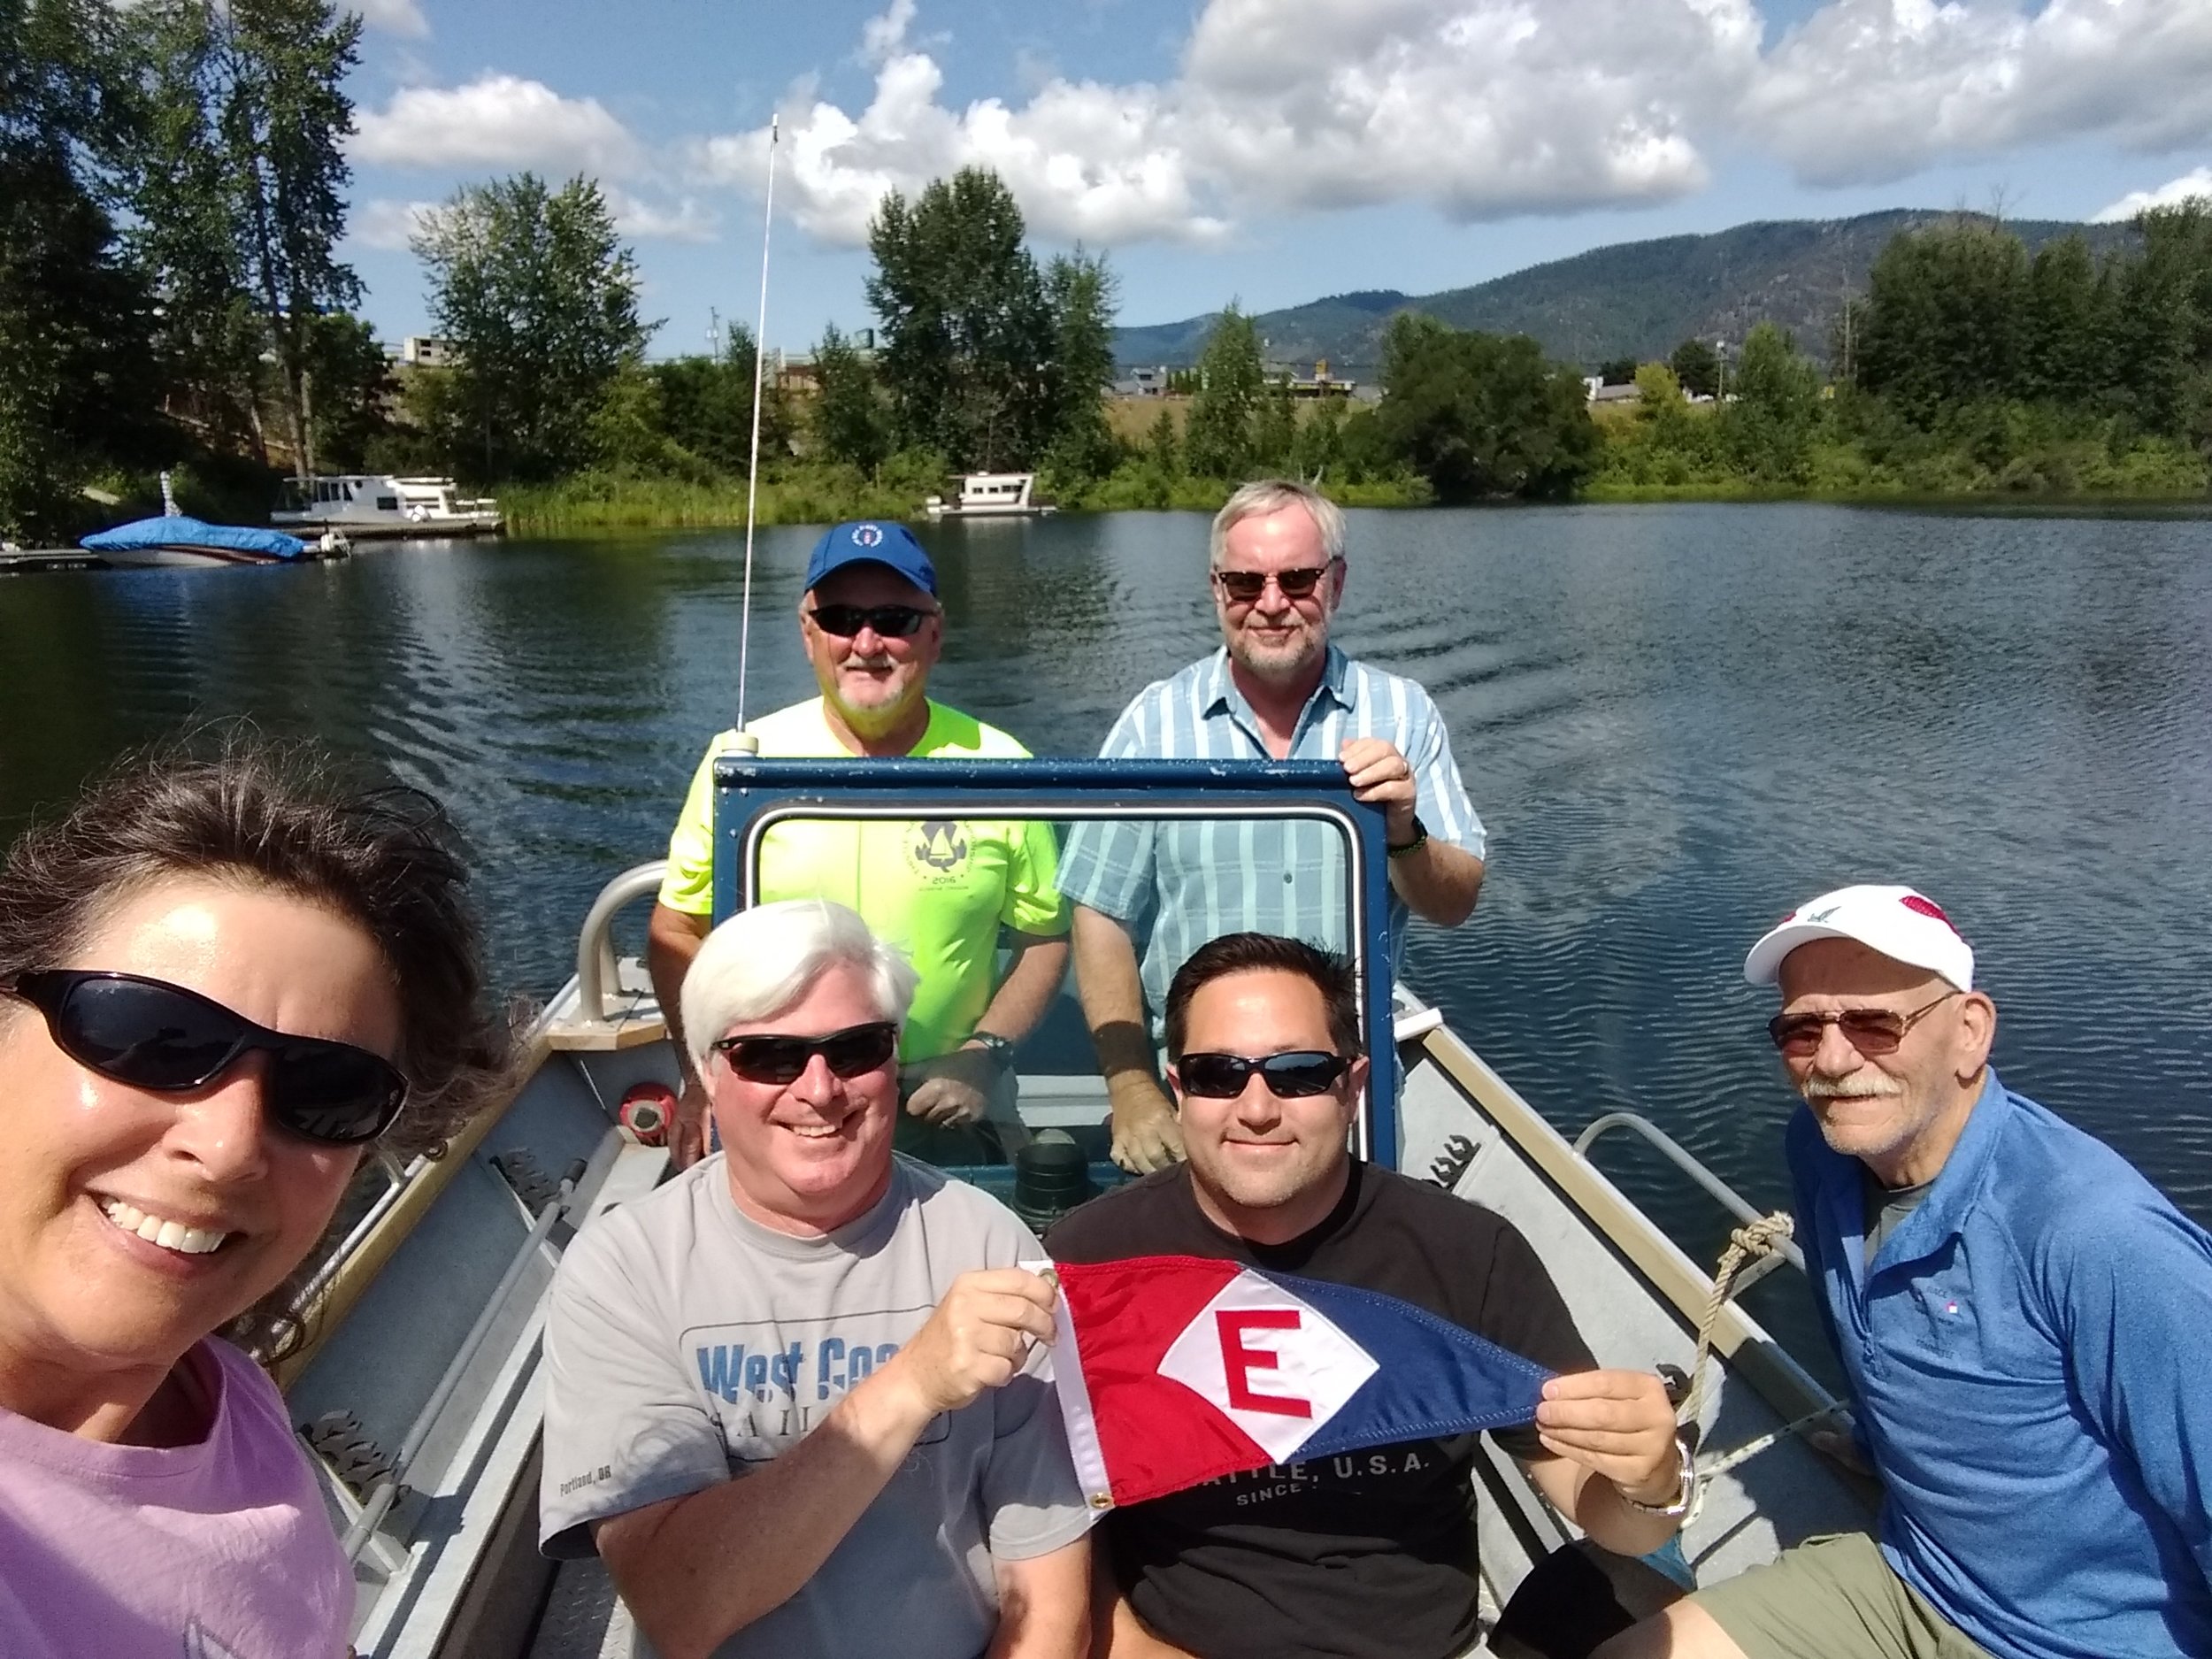  Members of EYC’s Race Committee showed their colors at 2019 Thistle Nationals in Sandpoint, Idaho 